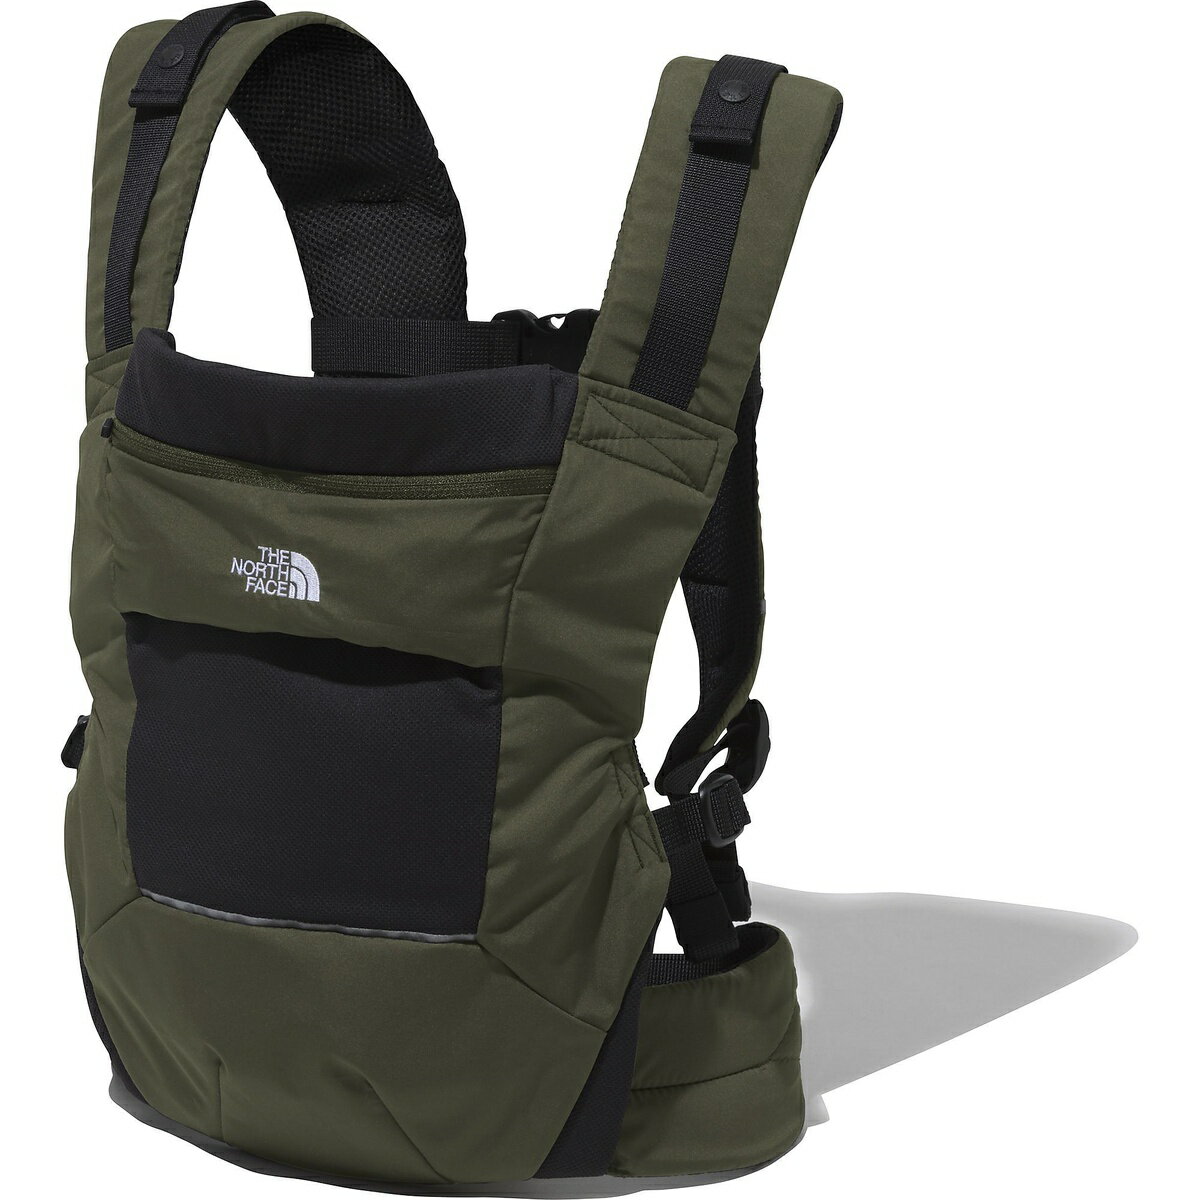 THE NORTH FACE (ノースフェイス) Baby Compact Carrier（ベイビーコンパクトキャリアー）